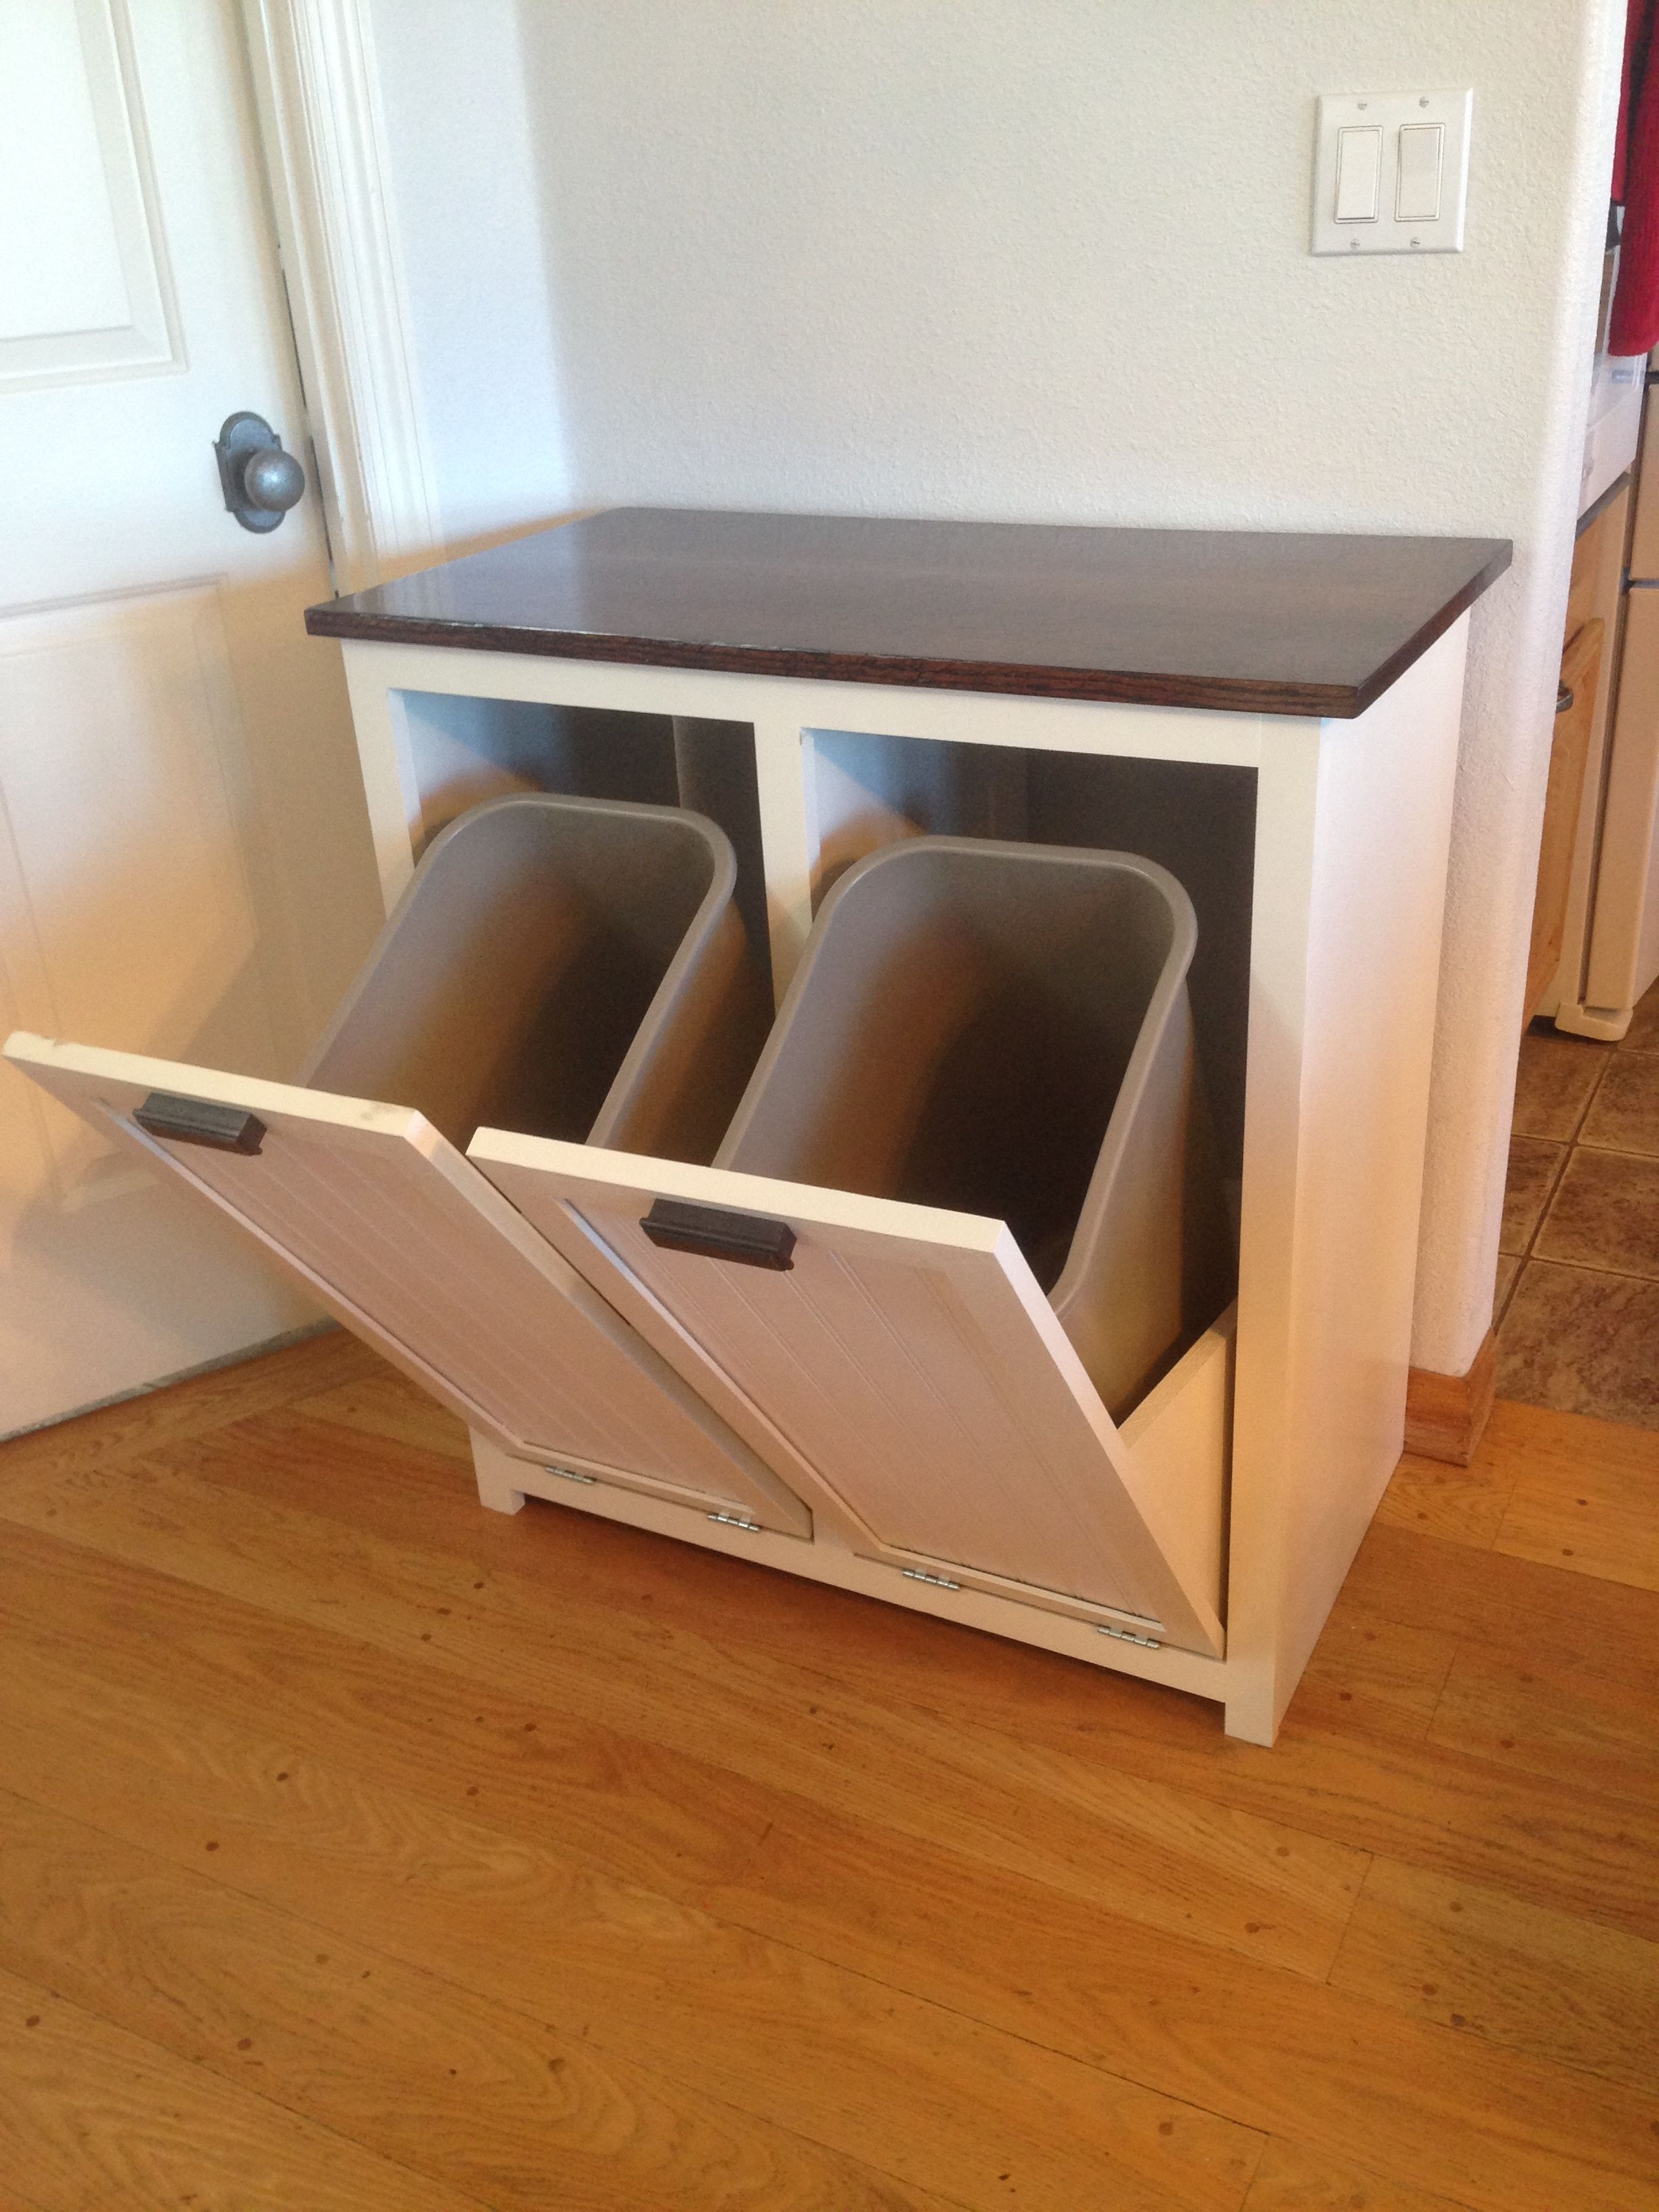 A Tilt Out Garbage And Recycling Cabinet Diy Moskonyha intended for size 2448 X 3264